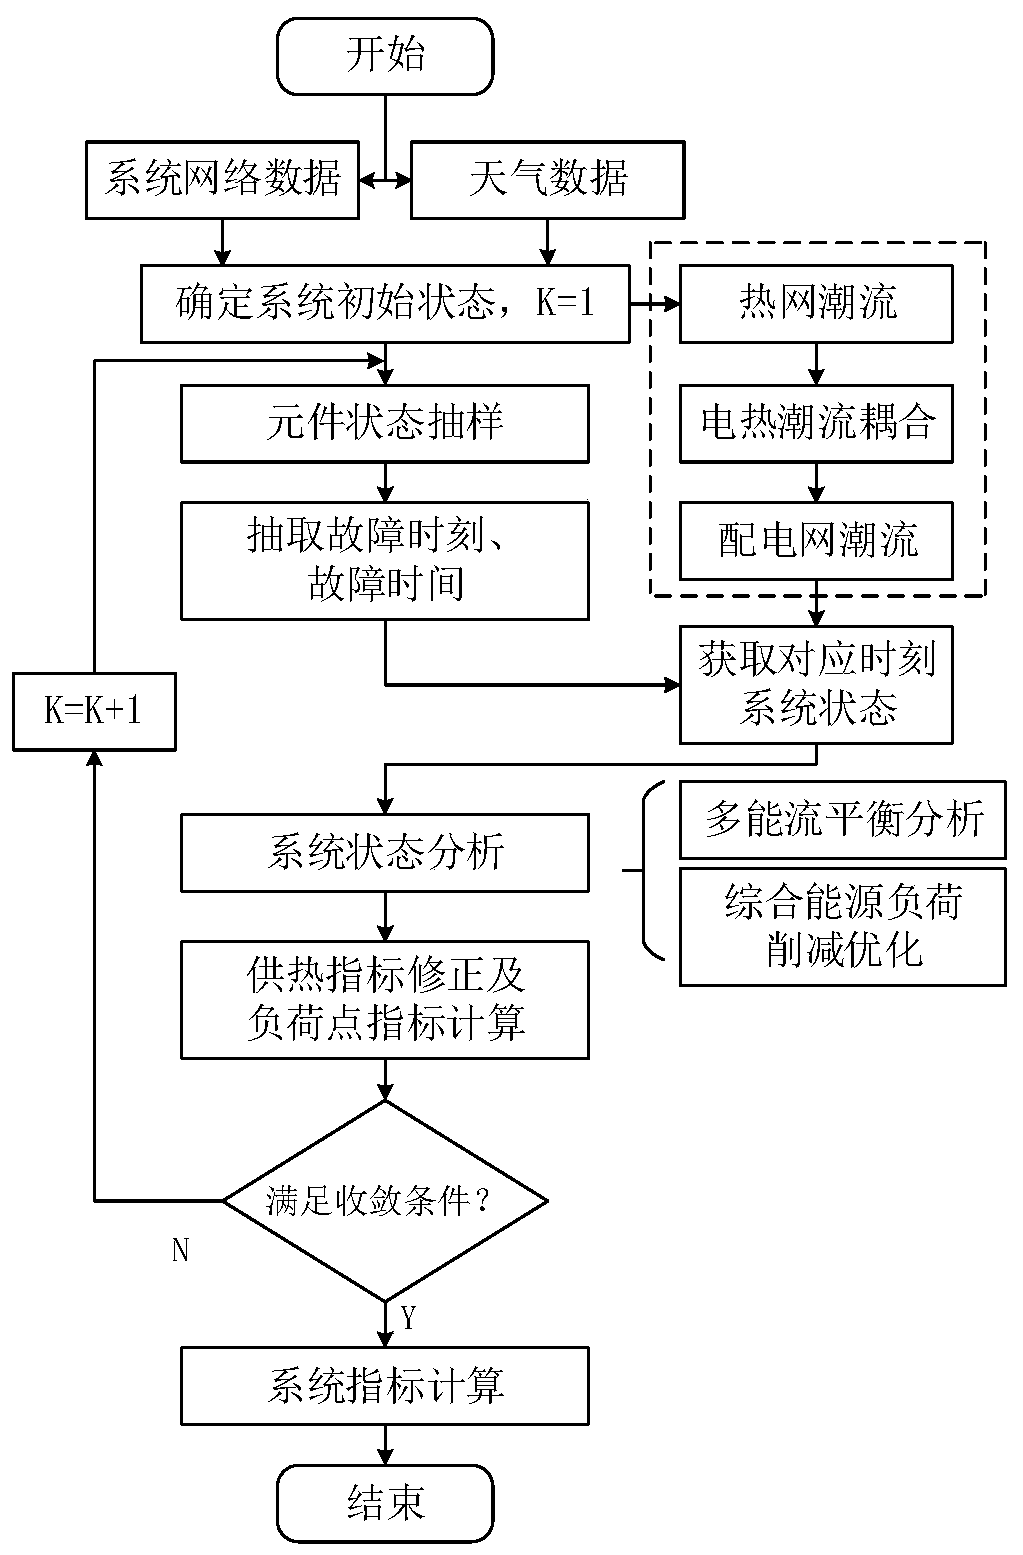 Reliability evaluation method and system for comprehensive energy system